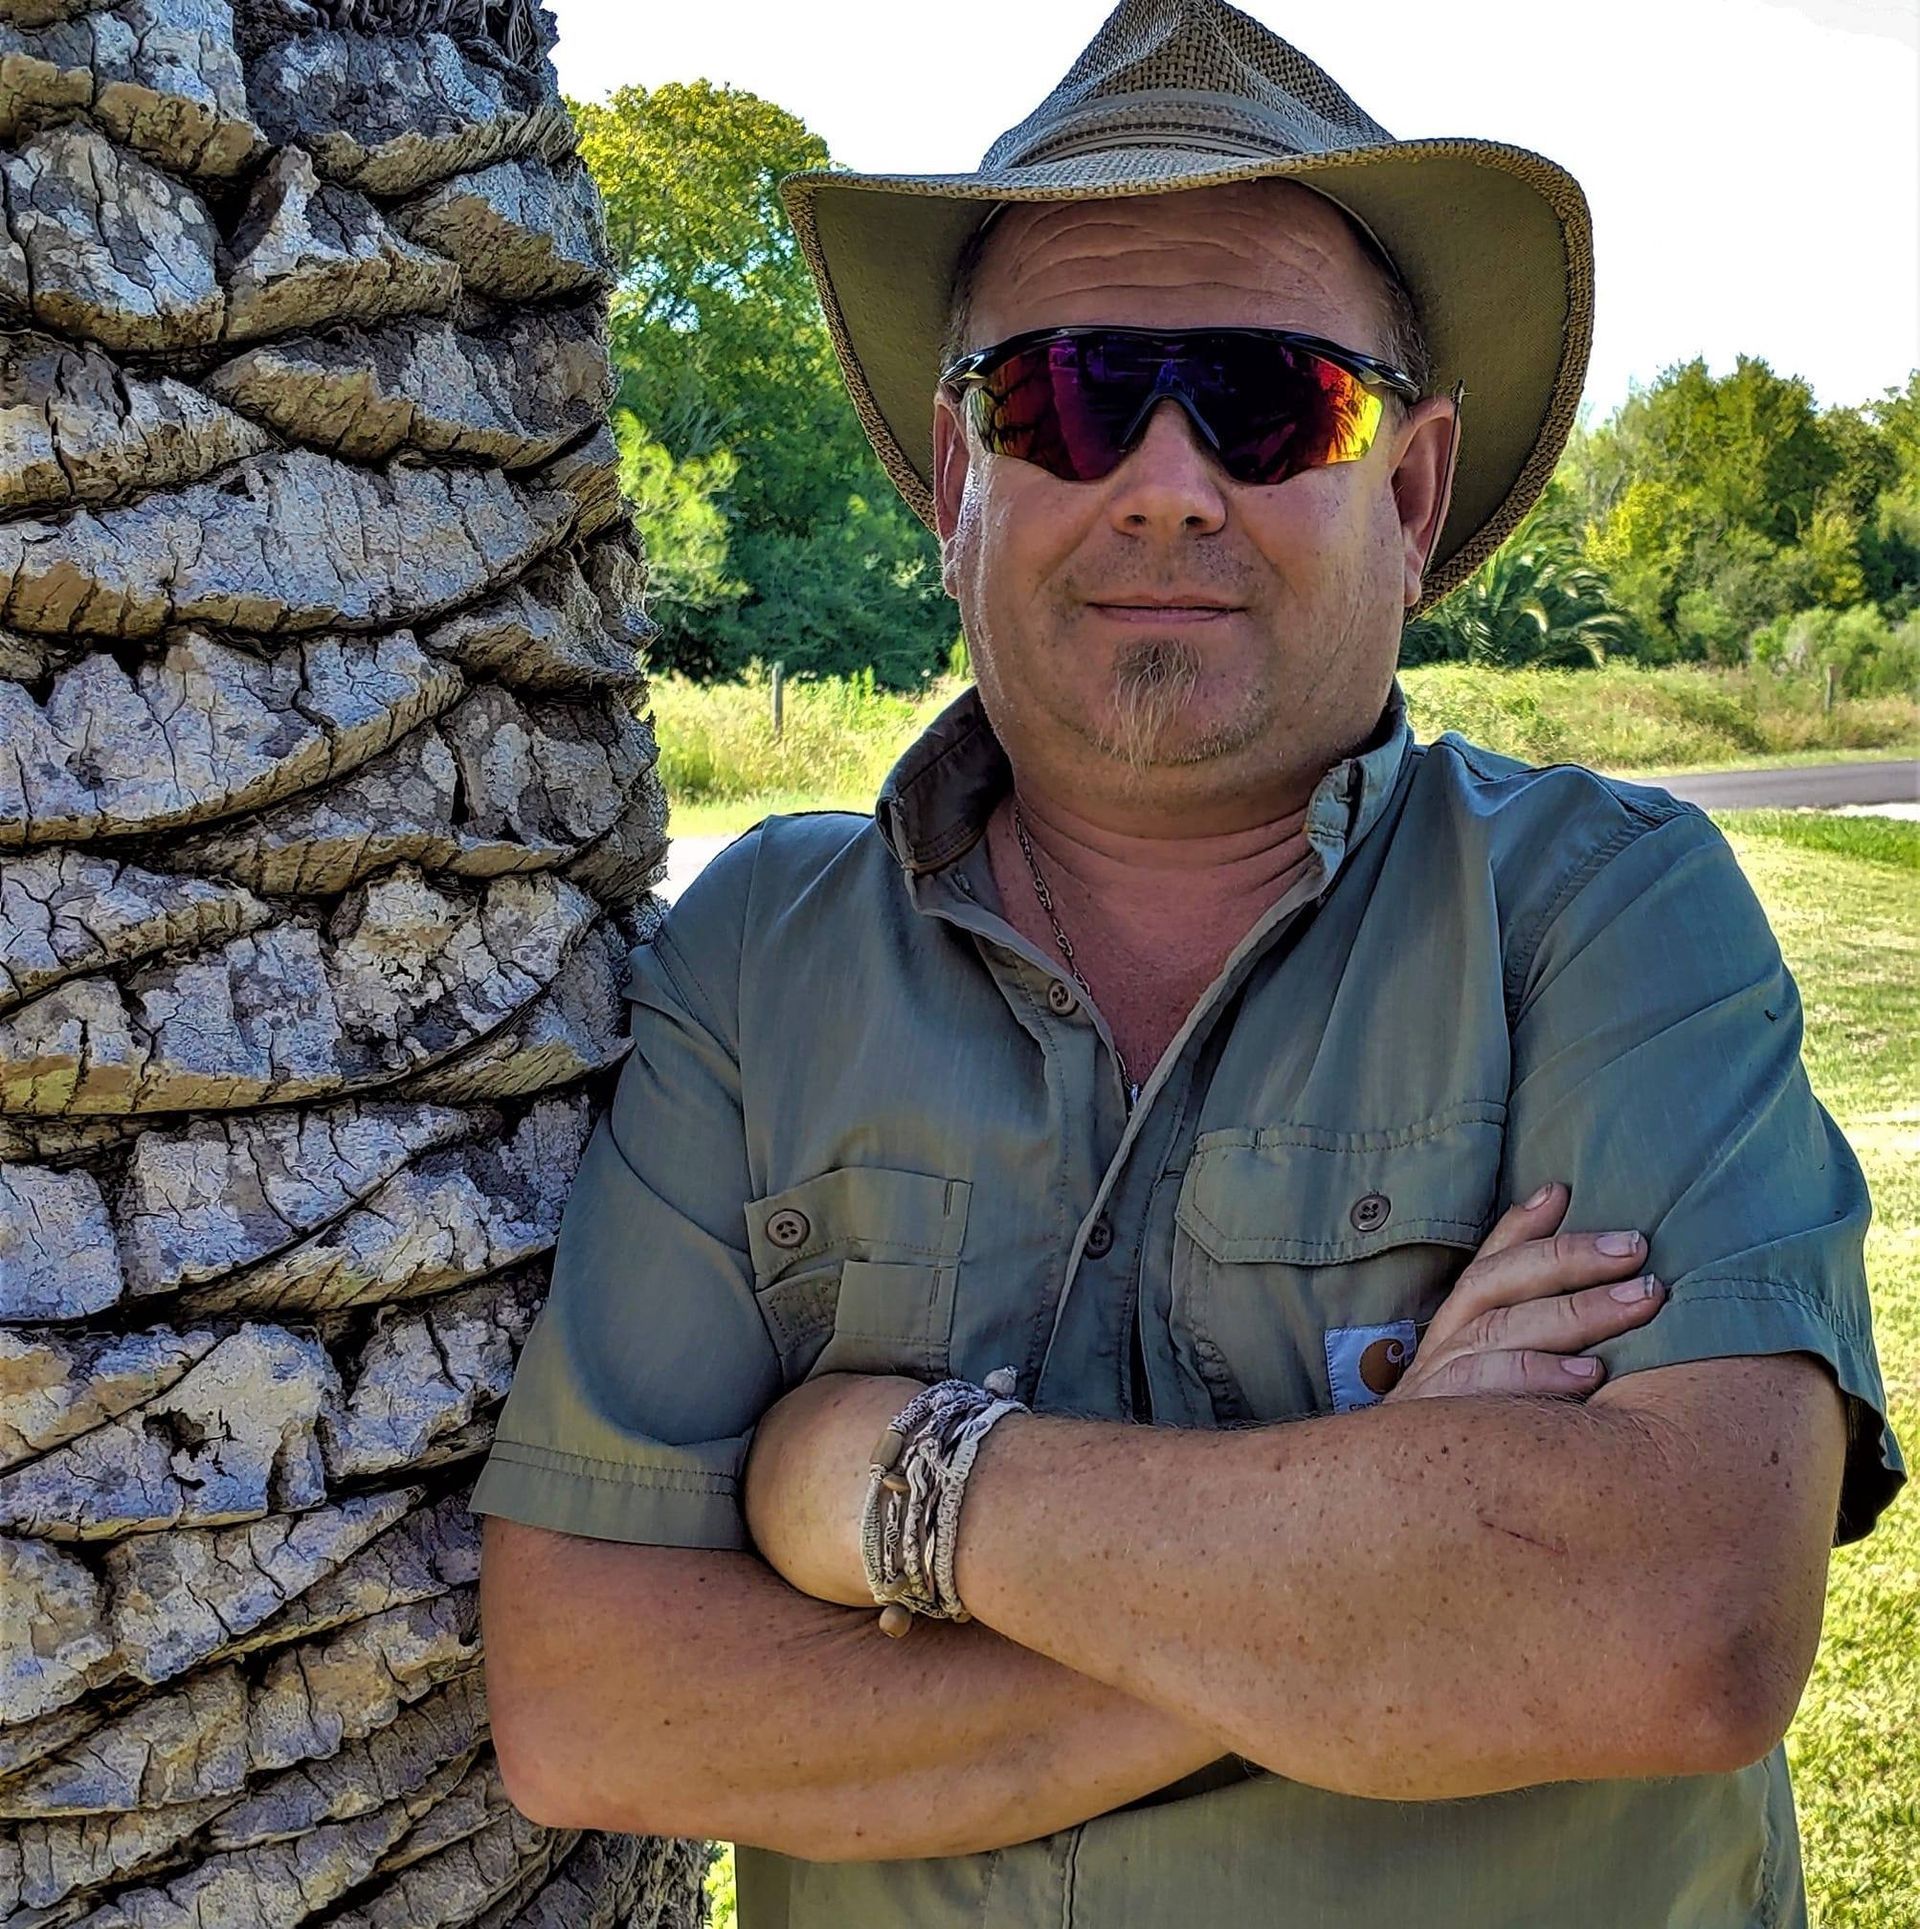 This image shows a headshot of Eric Putnam BCMA standing next to a palm tree with his arms crossed.